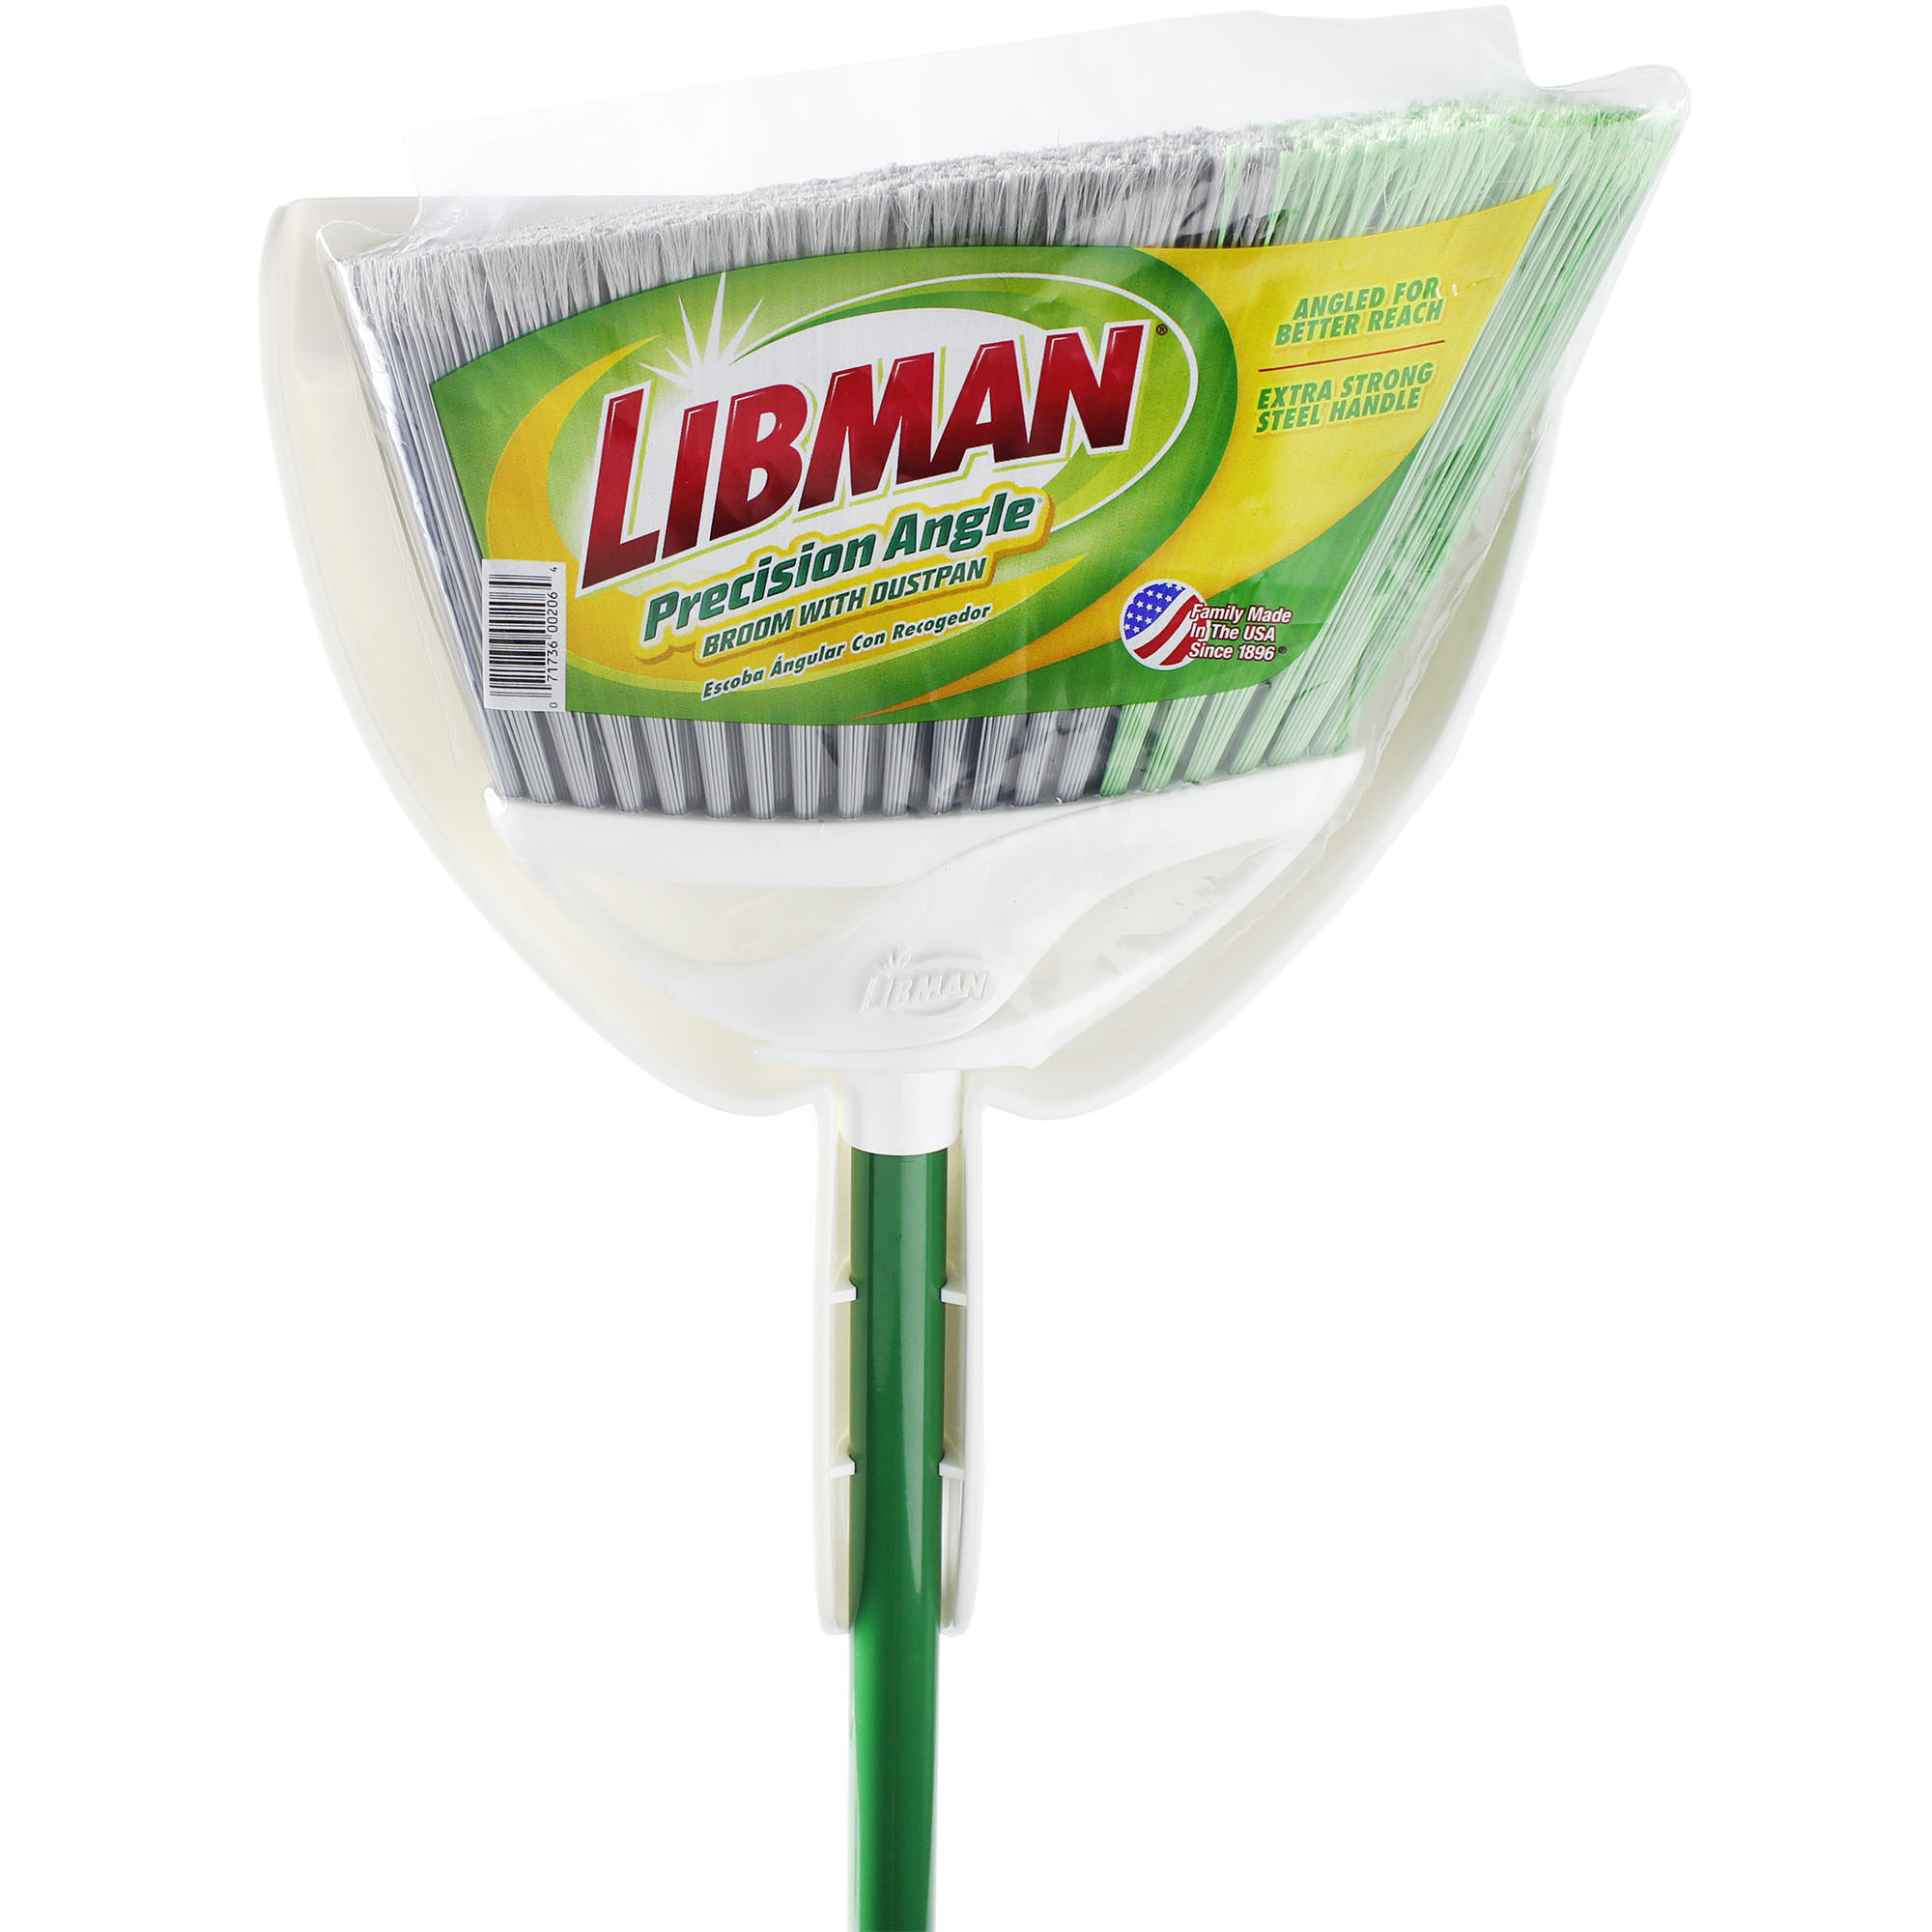 Libman Precision Angle Broom with Dust Pan Green White - image 3 of 7